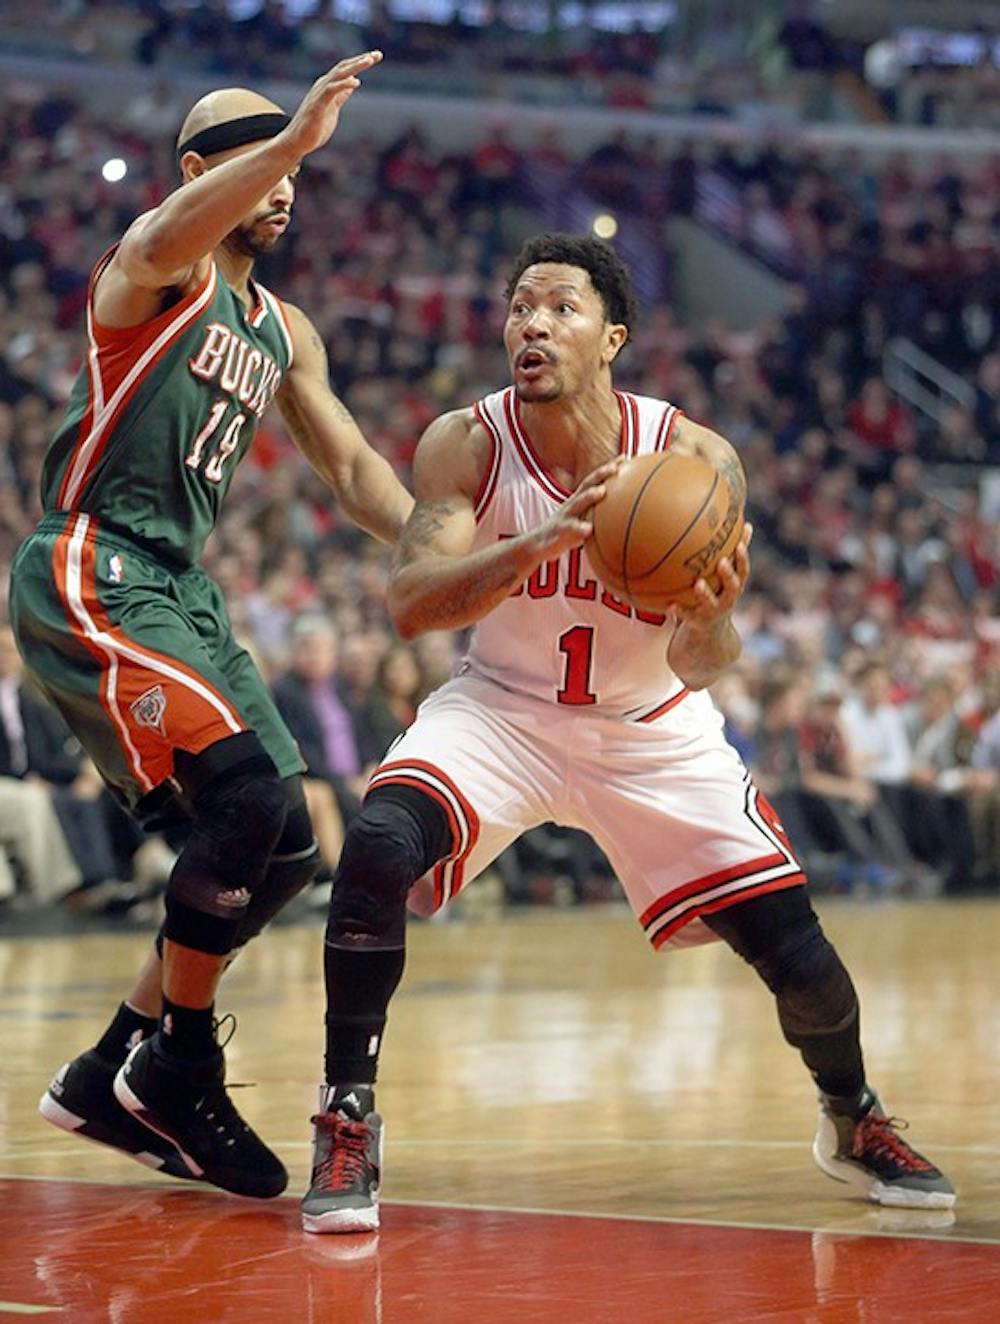 Chicago Bulls guard Derrick Rose (1) drives on Milwaukee Bucks guard Jerryd Bayless (19) during the first half on Monday, April 20, 2015, at the United Center in Chicago. (Brian Cassella/Chicago Tribune/TNS)